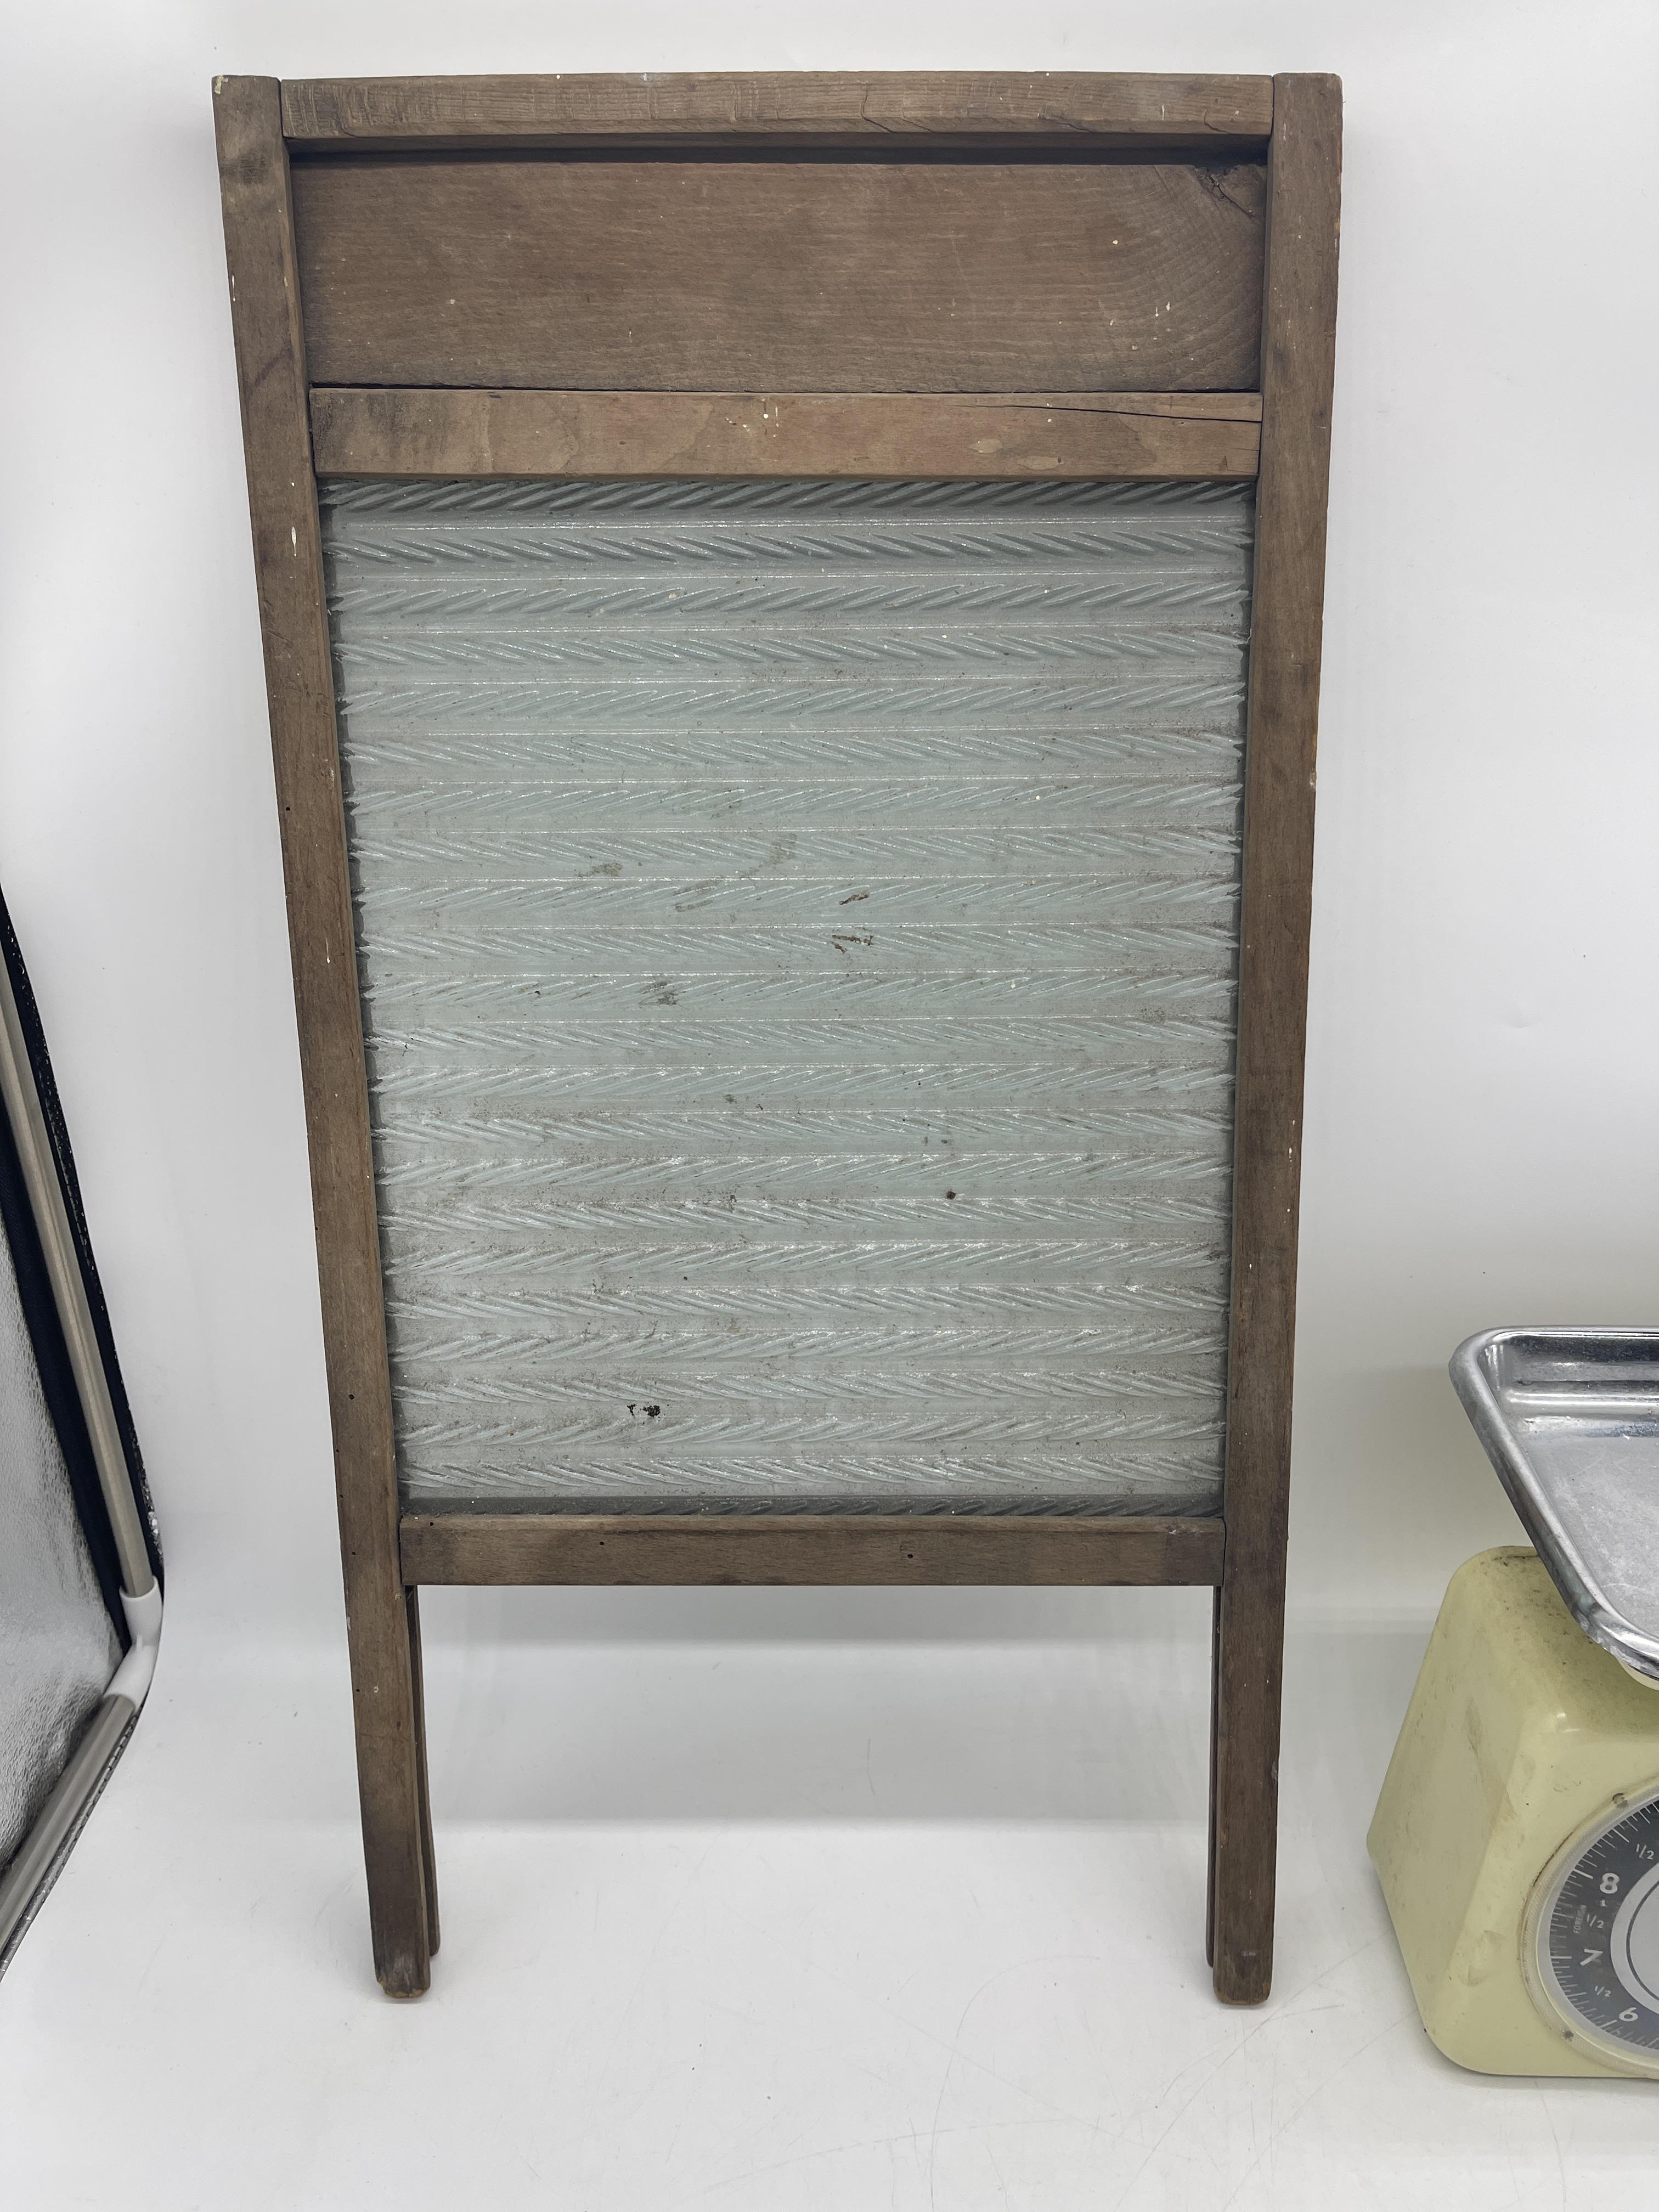 Vintage Washboard along with Vintage Tower Scales. - Image 2 of 7